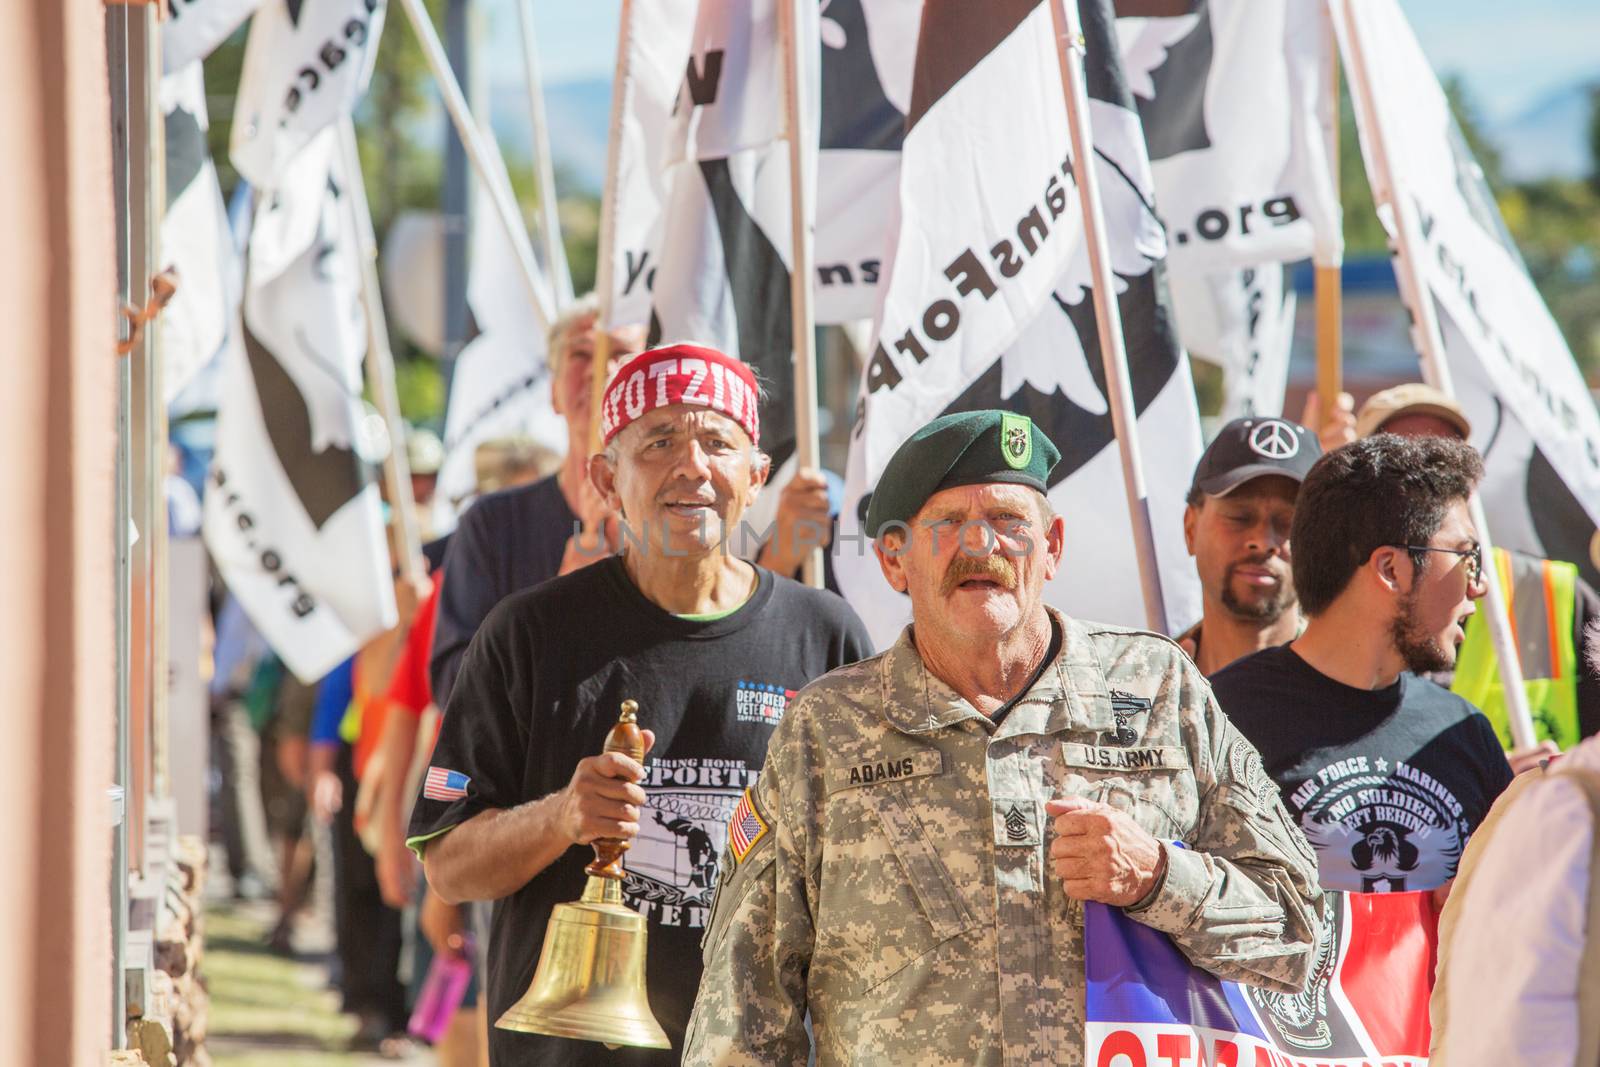 Veterans and Supporters at Border Protest March by Creatista